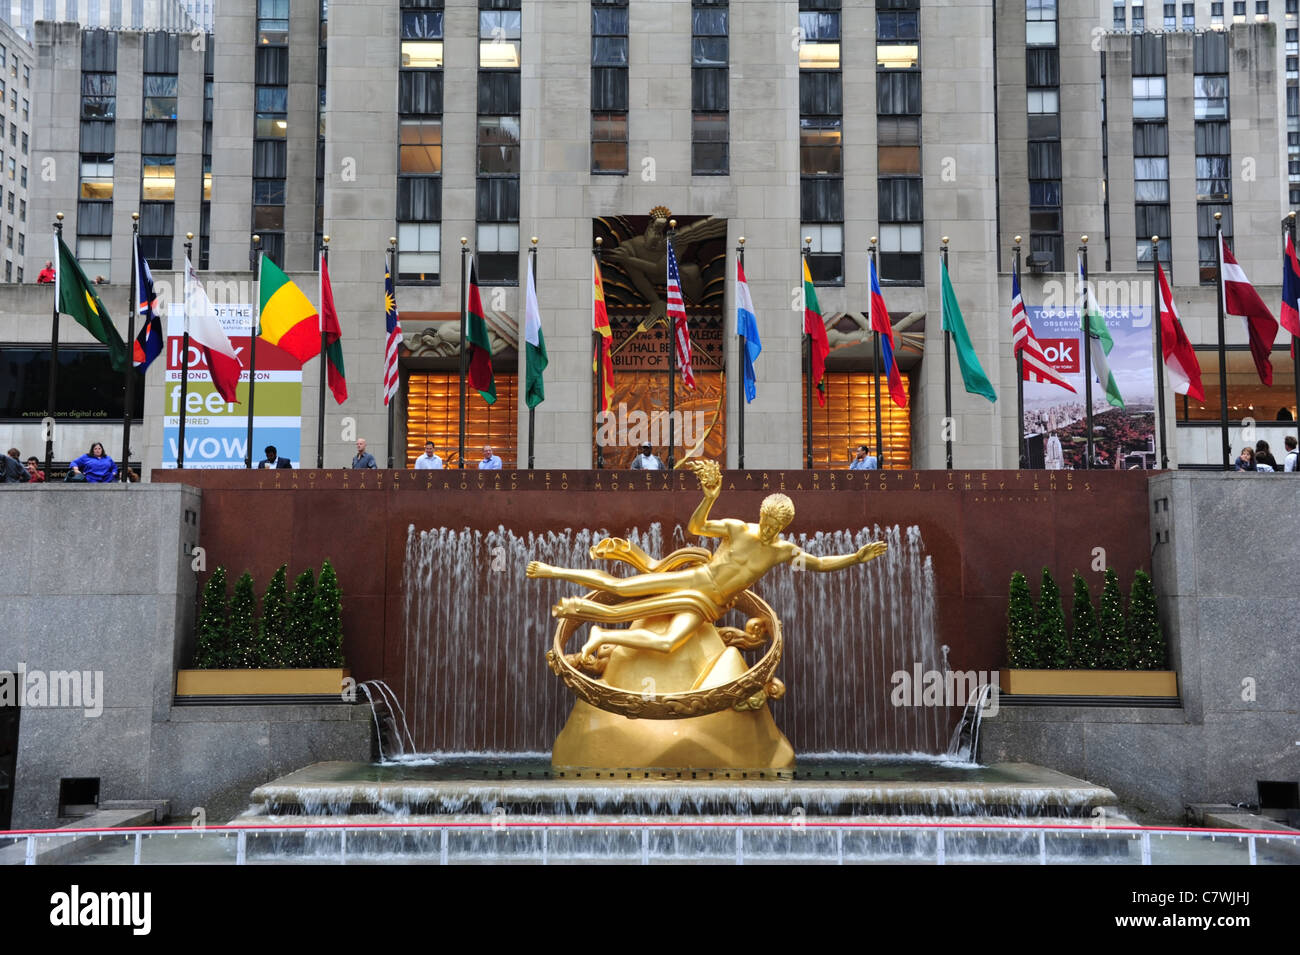 View, towards people and flags, gilded sculpture Prometheus, front GE Building, Rockefeller Centre Ice Rink, New York City, USA Stock Photo